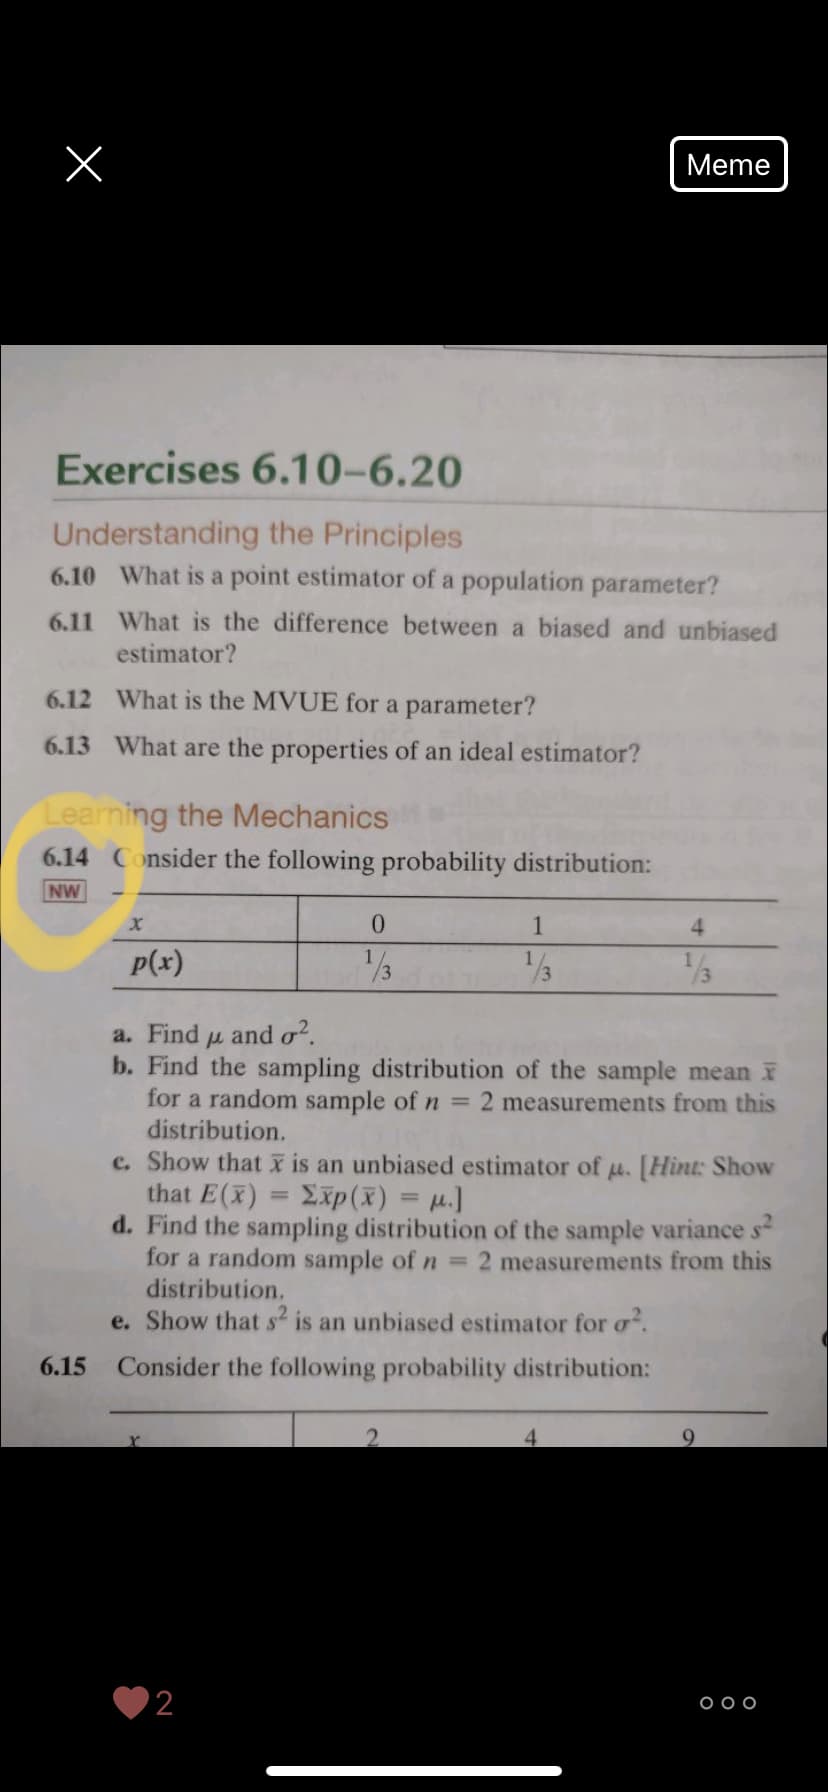 Meme
Exercises 6.10–6.20
Understanding the Principles
6.10 What is a point estimator of a population parameter?
6.11 What is the difference between a biased and unbiased
estimator?
6.12 What is the MVUE for a parameter?
6.13 What are the properties of an ideal estimator?
Learning the Mechanics
6.14 Consider the following probability distribution:
NW
0.
1
4
p(x)
1/3
/3
a. Find u and o?.
b. Find the sampling distribution of the sample mean
for a random sample of n = 2 measurements from this
distribution.
c. Show that X is an unbiased estimator of u. [Hint: Show
that E(x)
d. Find the sampling distribution of the sample variance s-
for a random sample of n = 2 measurements from this
distribution.
e. Show that s is an unbiased estimator for o.
Σp ( ) -μ.]
6.15
Consider the following probability distribution:
'2
